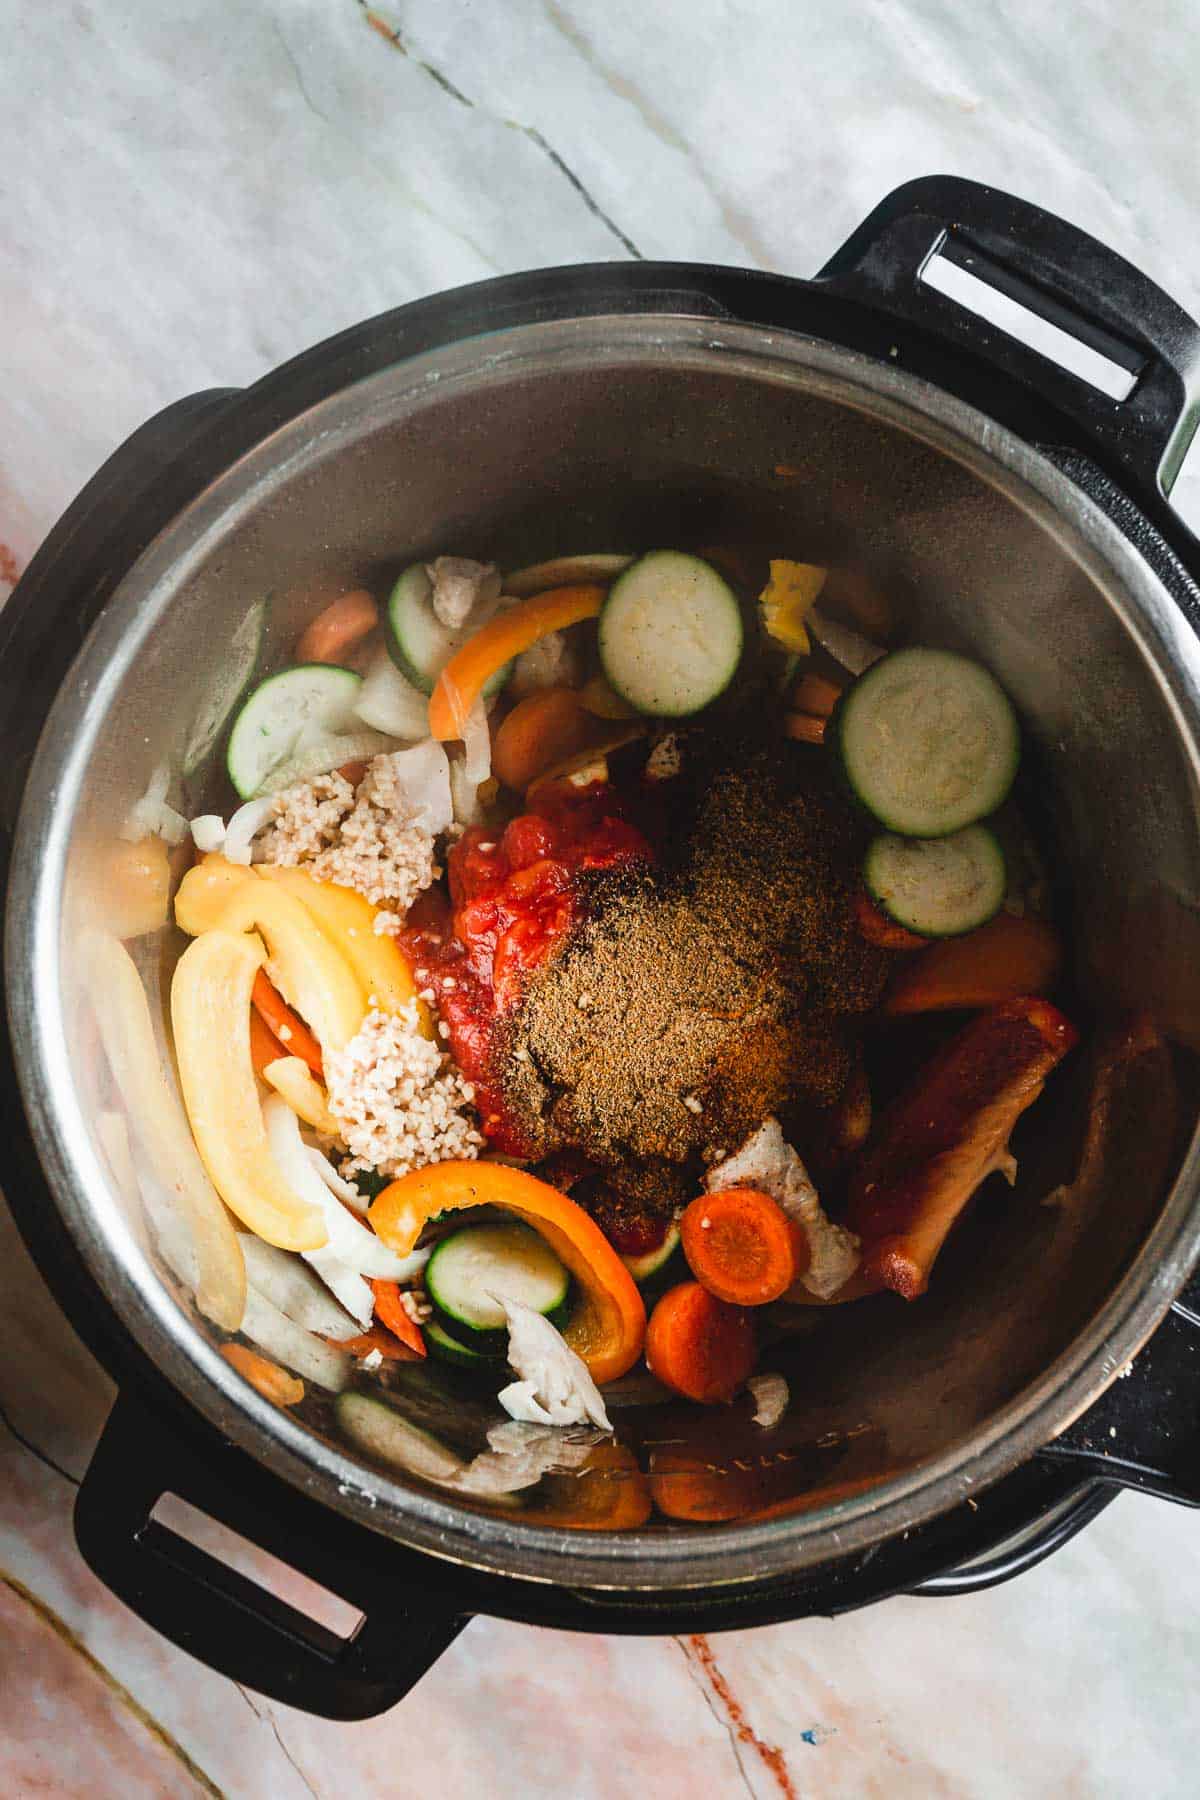 An instant pot filled with vegetables,chicken, and spices.